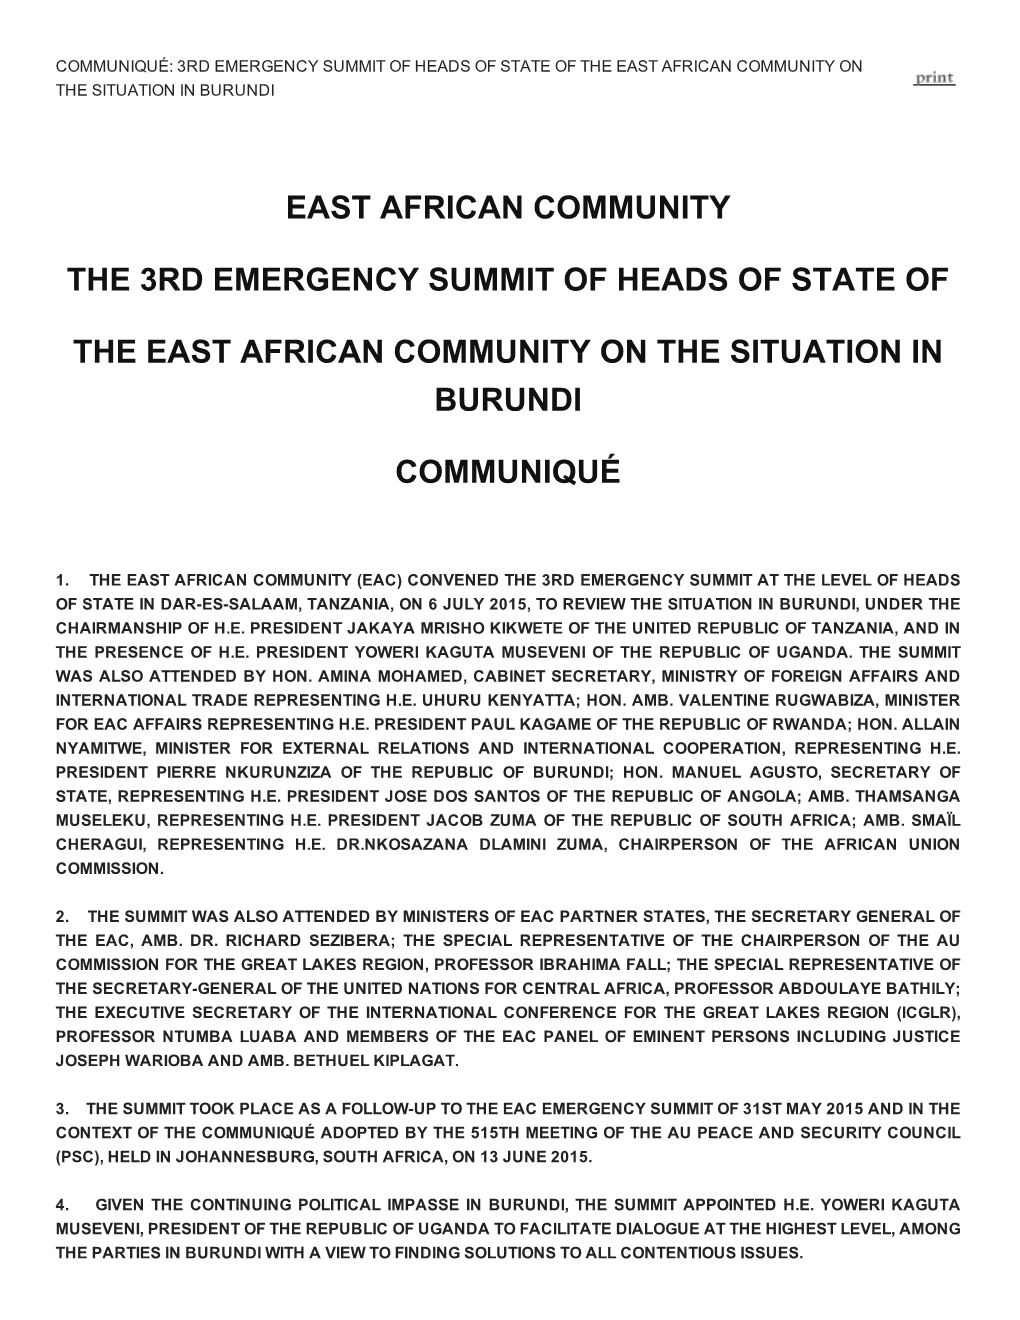 East African Community the 3Rd Emergency Summit of Heads of State